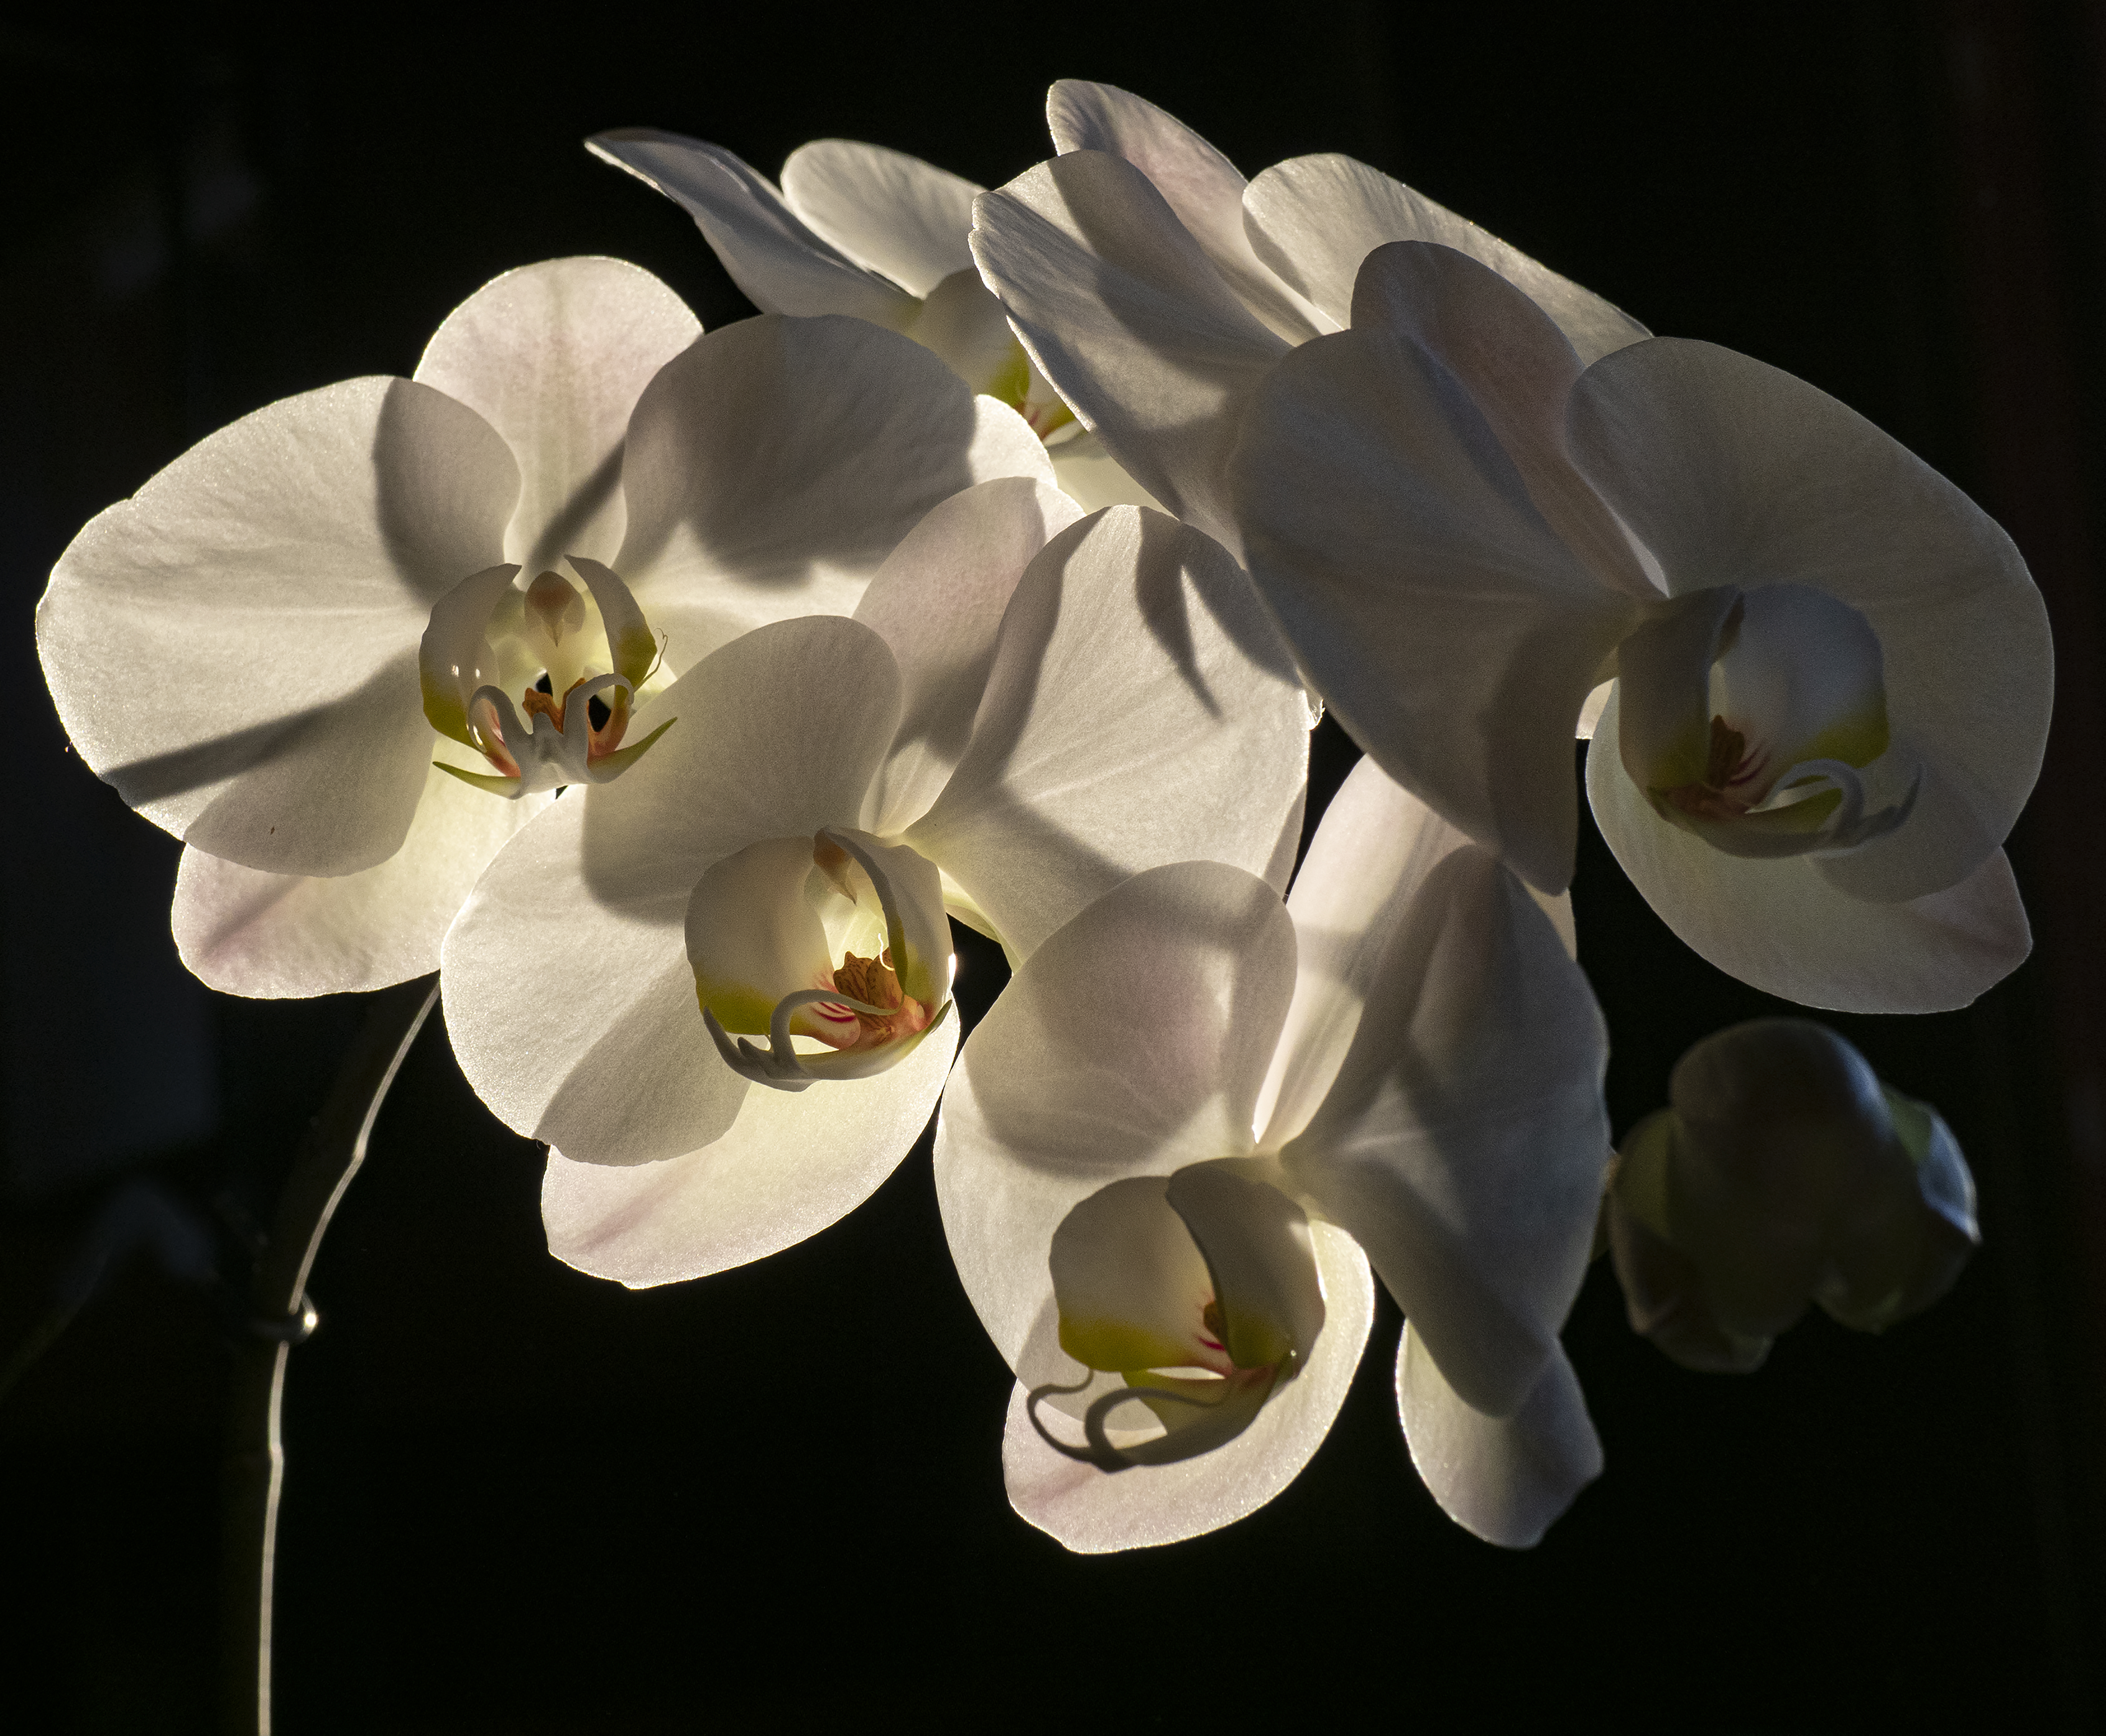 photo of group of white orchid flowers illuminated from behind against dark background